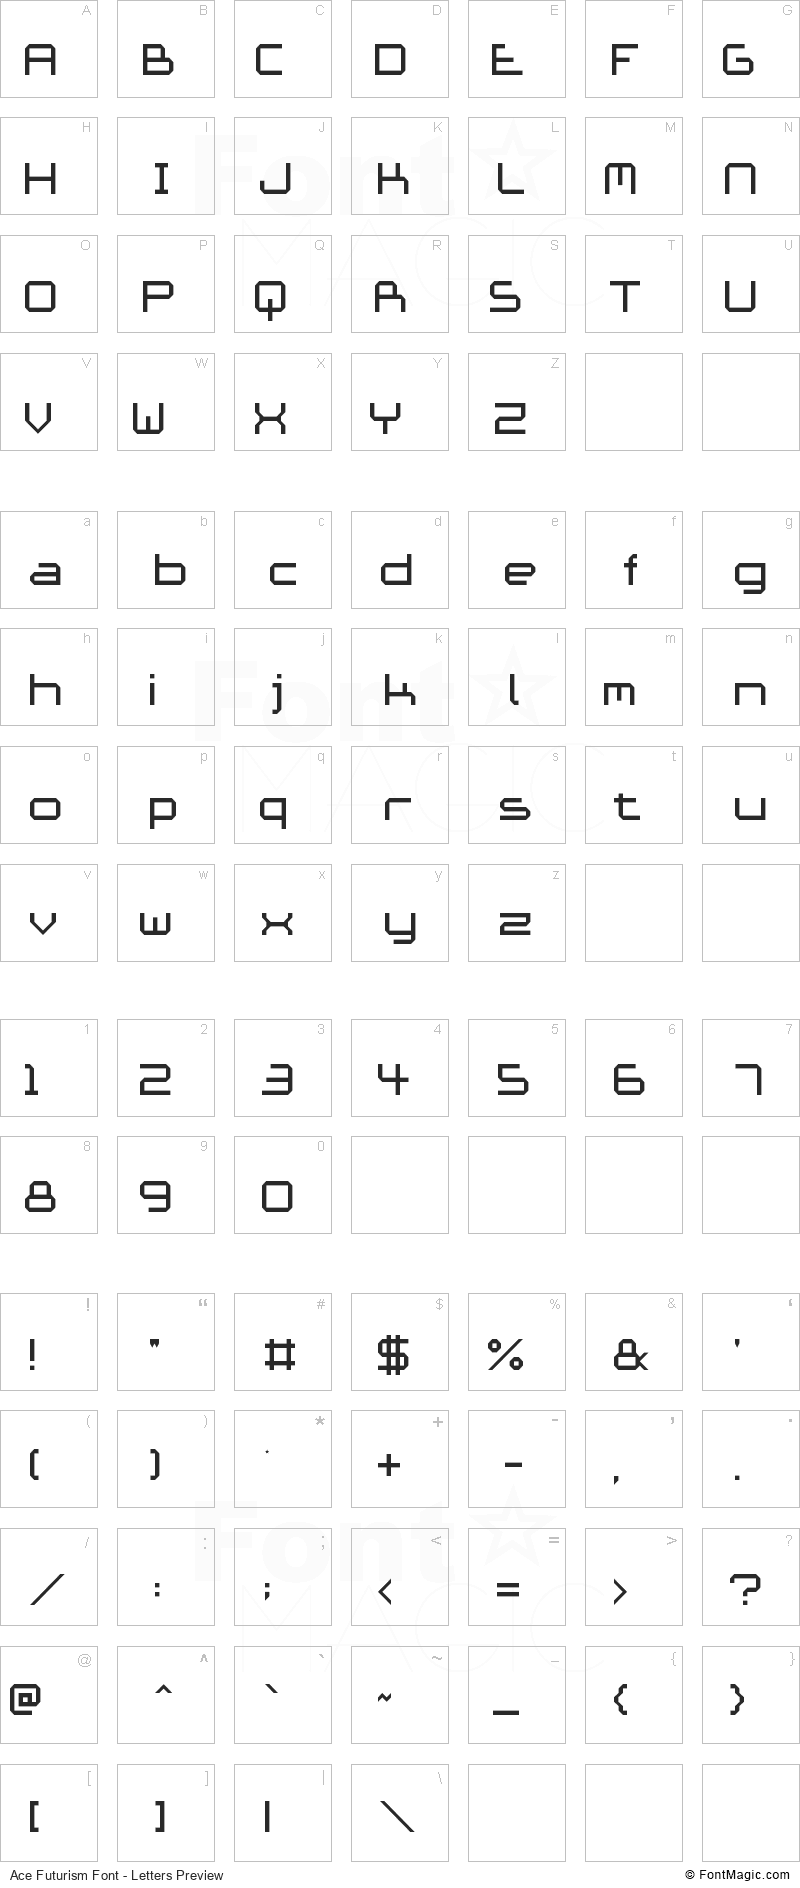 Ace Futurism Font - All Latters Preview Chart